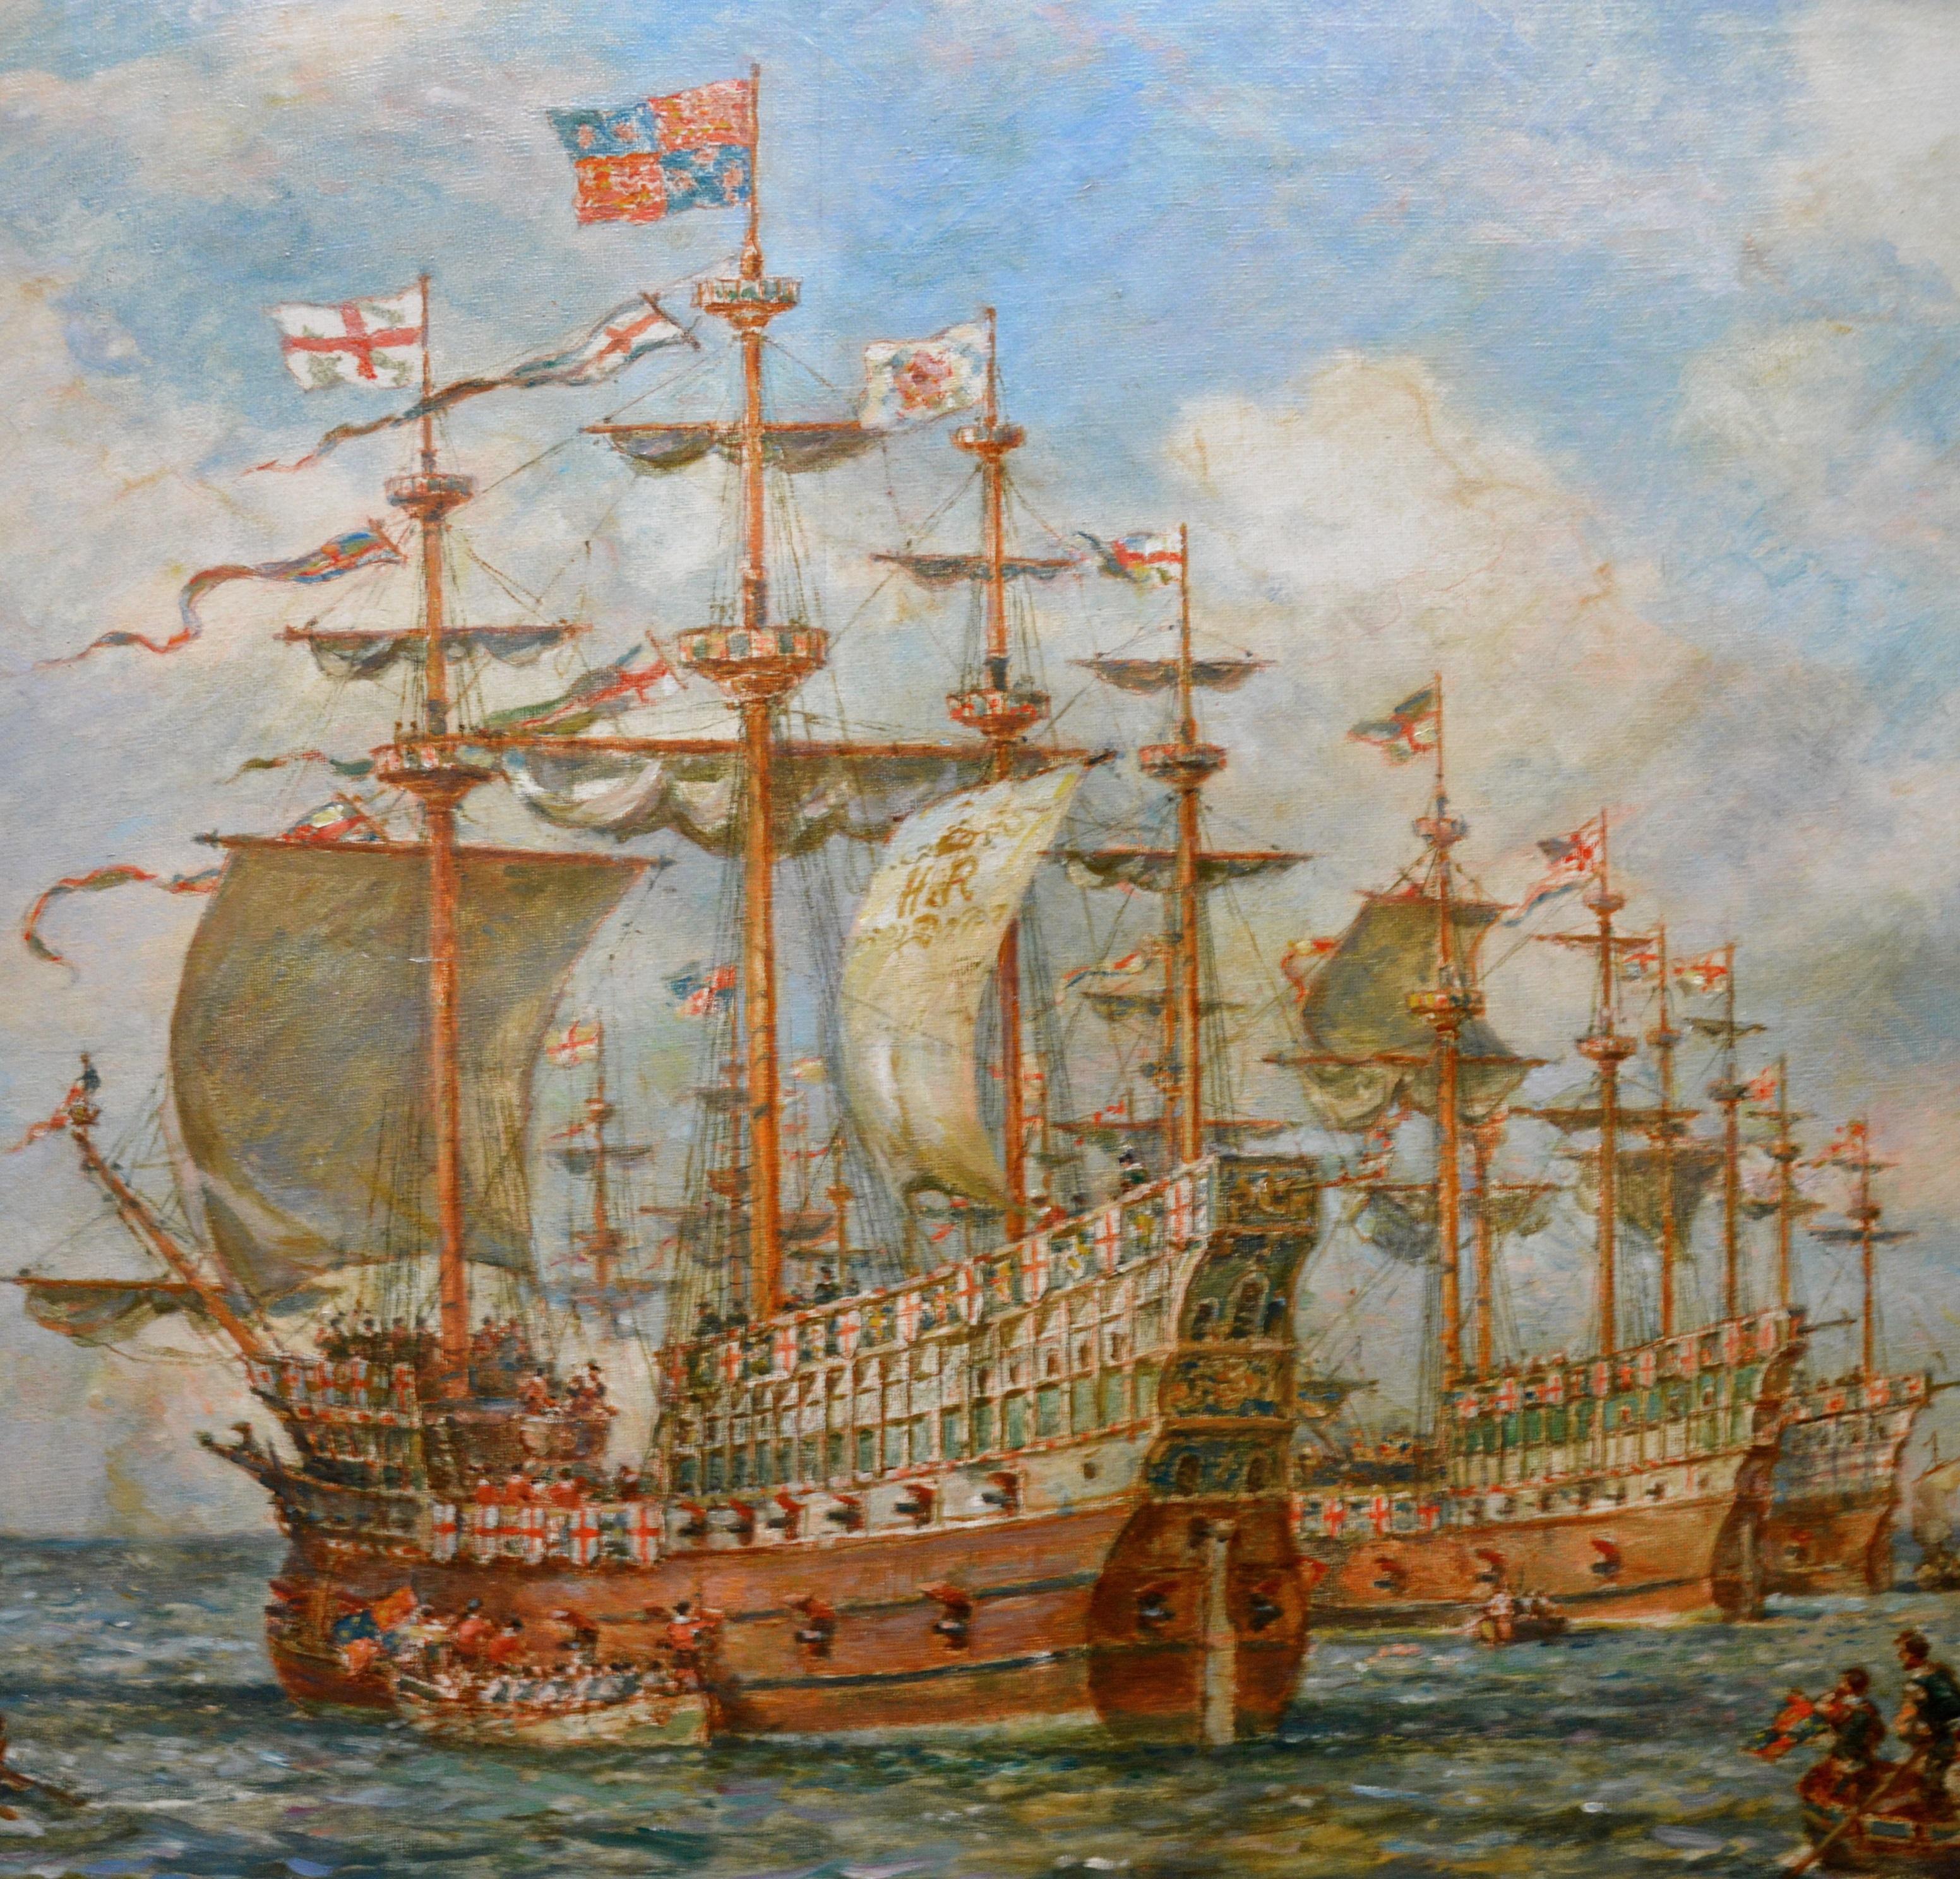 The Embarkation of Henry VIII - Post-Impressionist Painting by Bernard Gribble